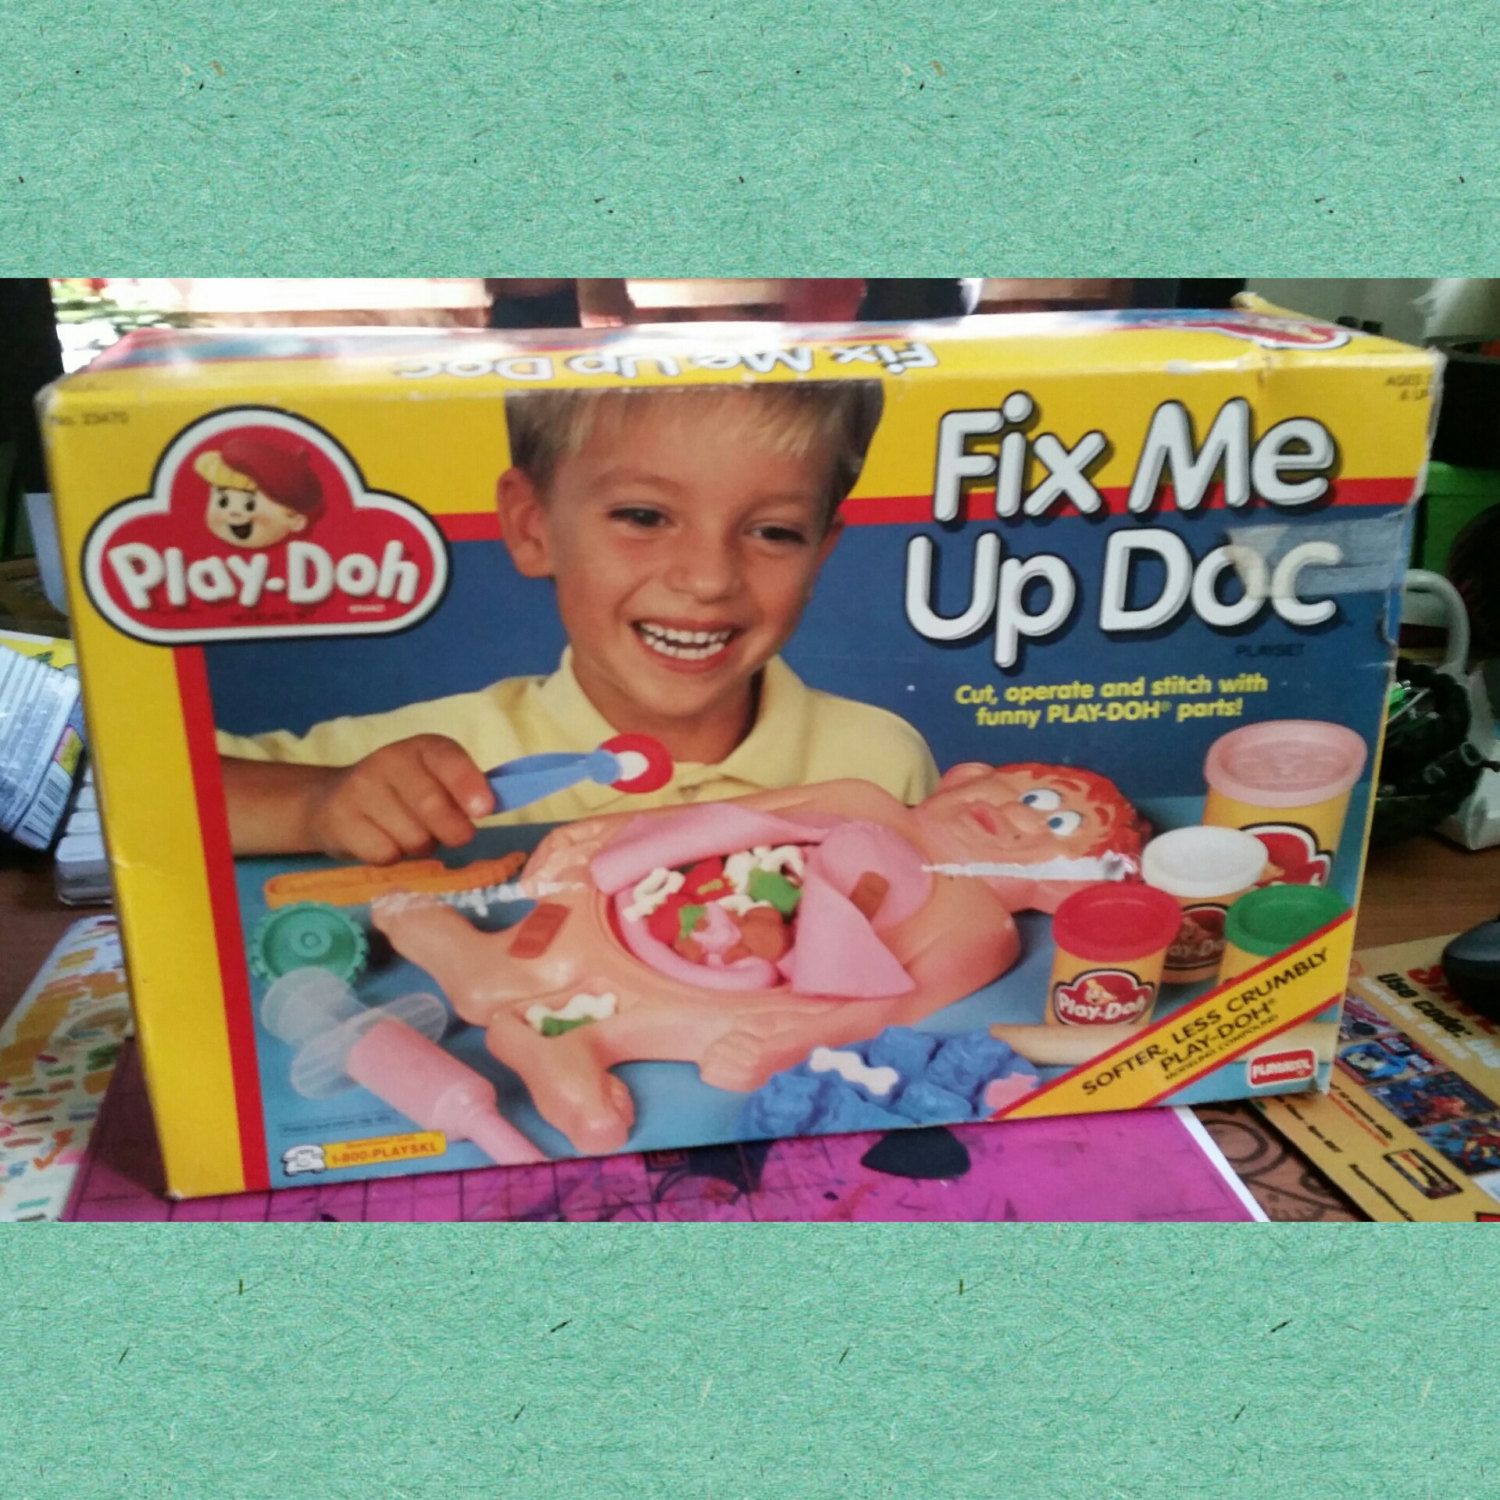 8 Of The Weirdest Play Doh Sets That Will Make You Want To Be A